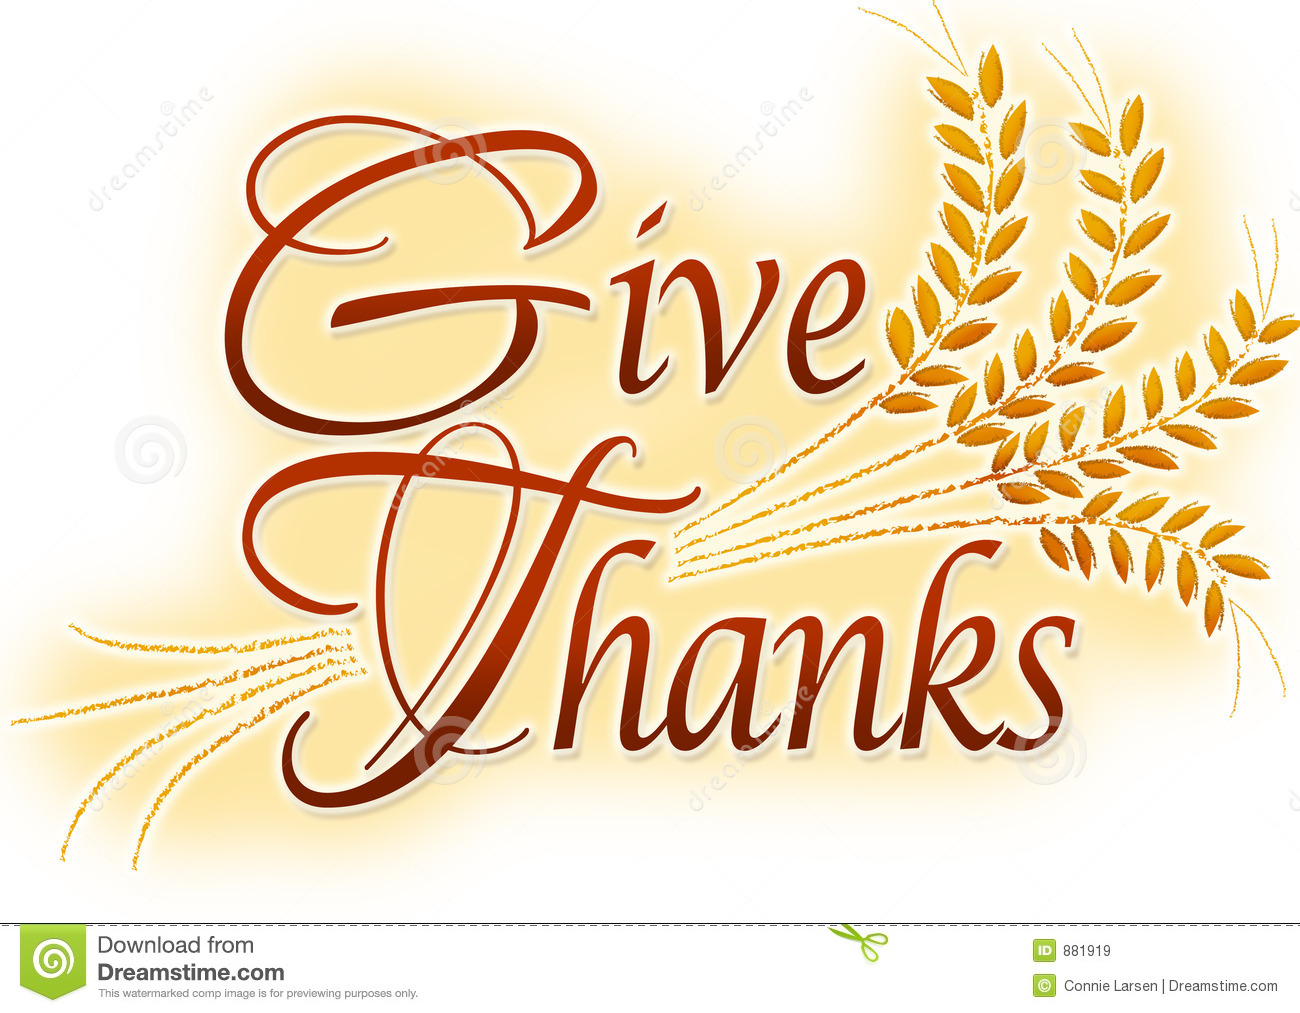 Give Thanks Royalty Free Stock Images   Image  881919